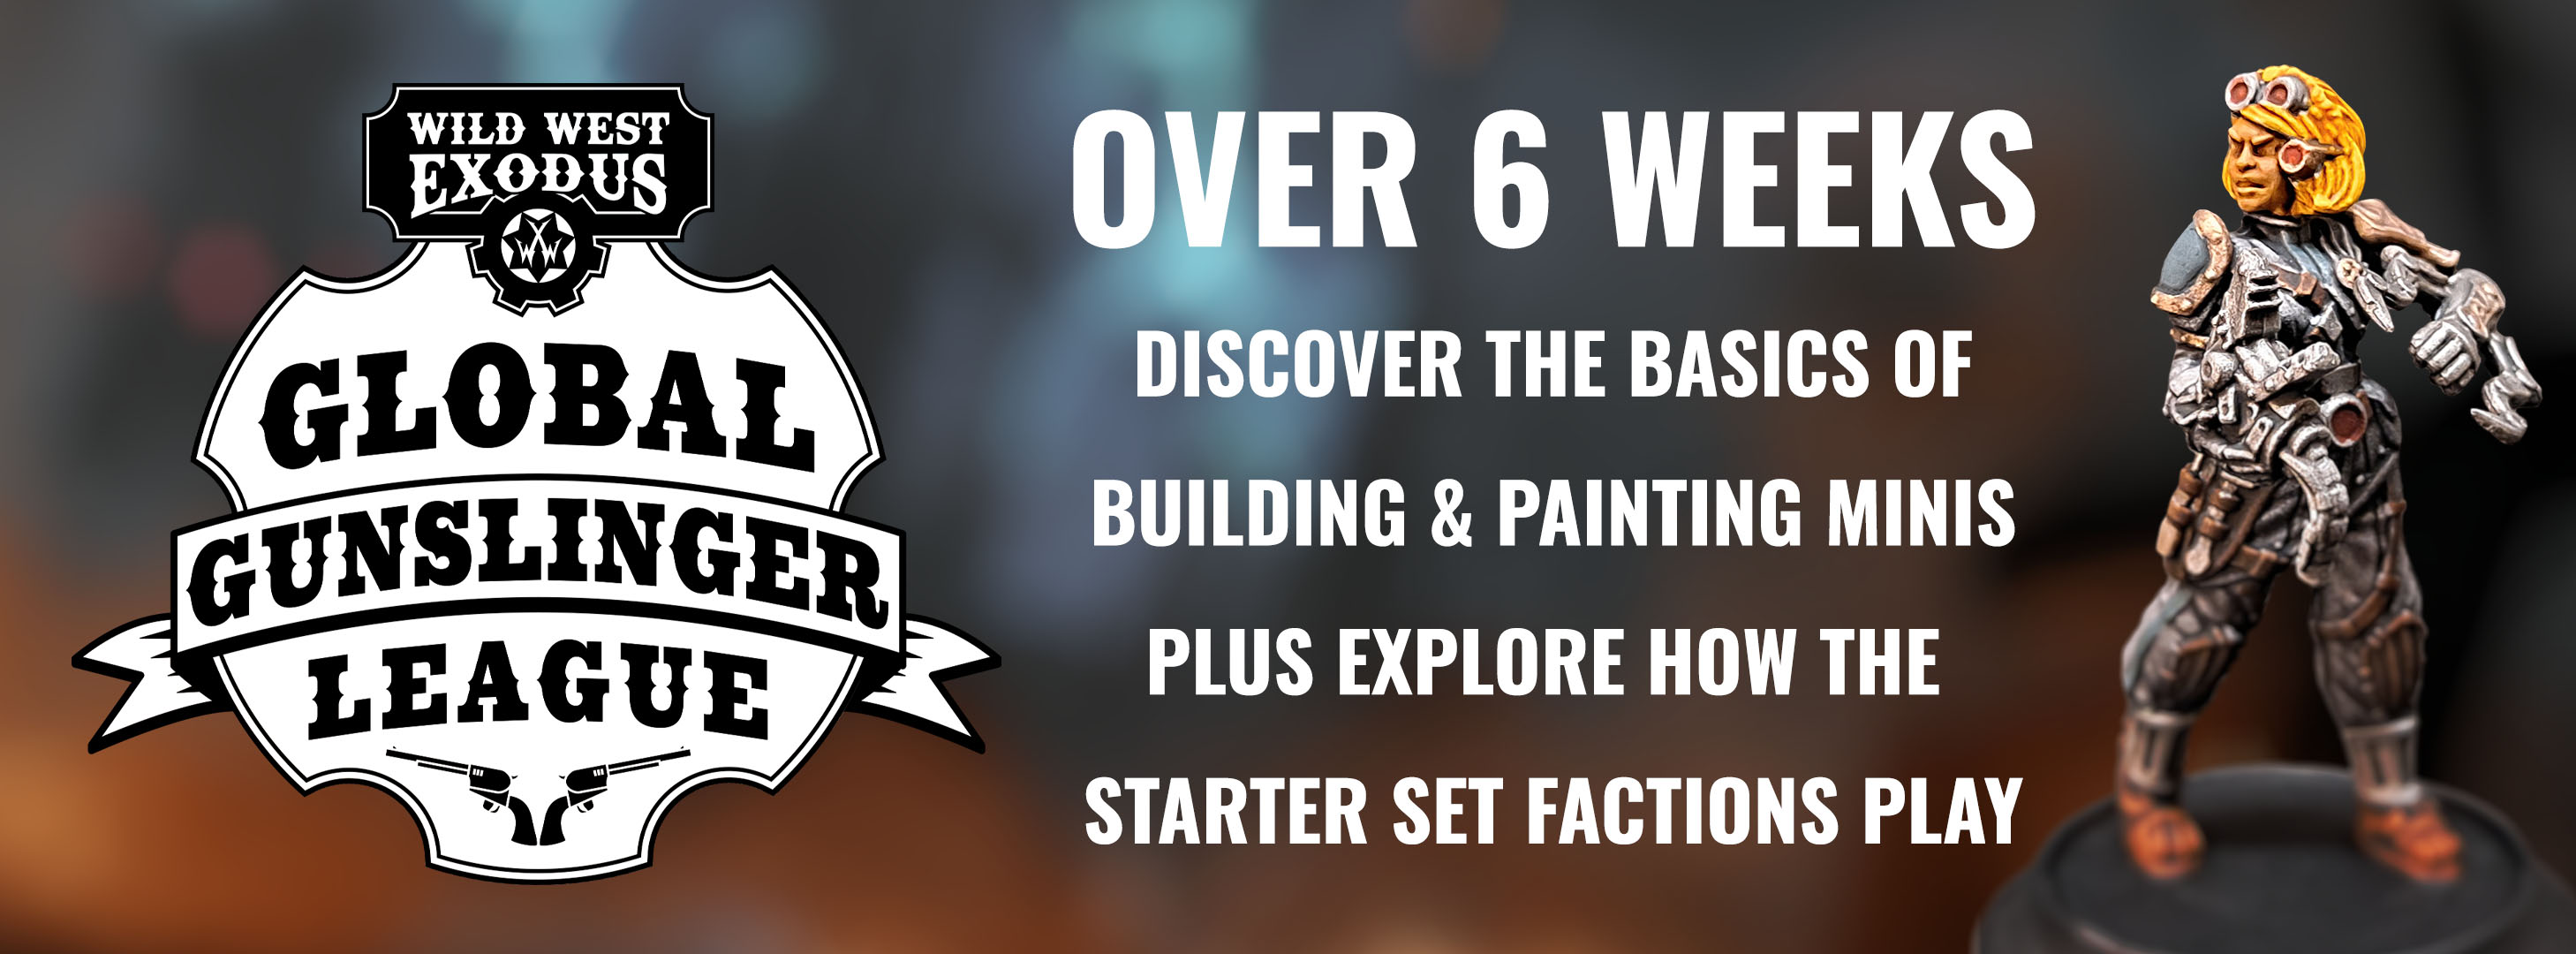 Over 6 Weeks discover the basics of building & painting minis plus explore how the starter set factions play